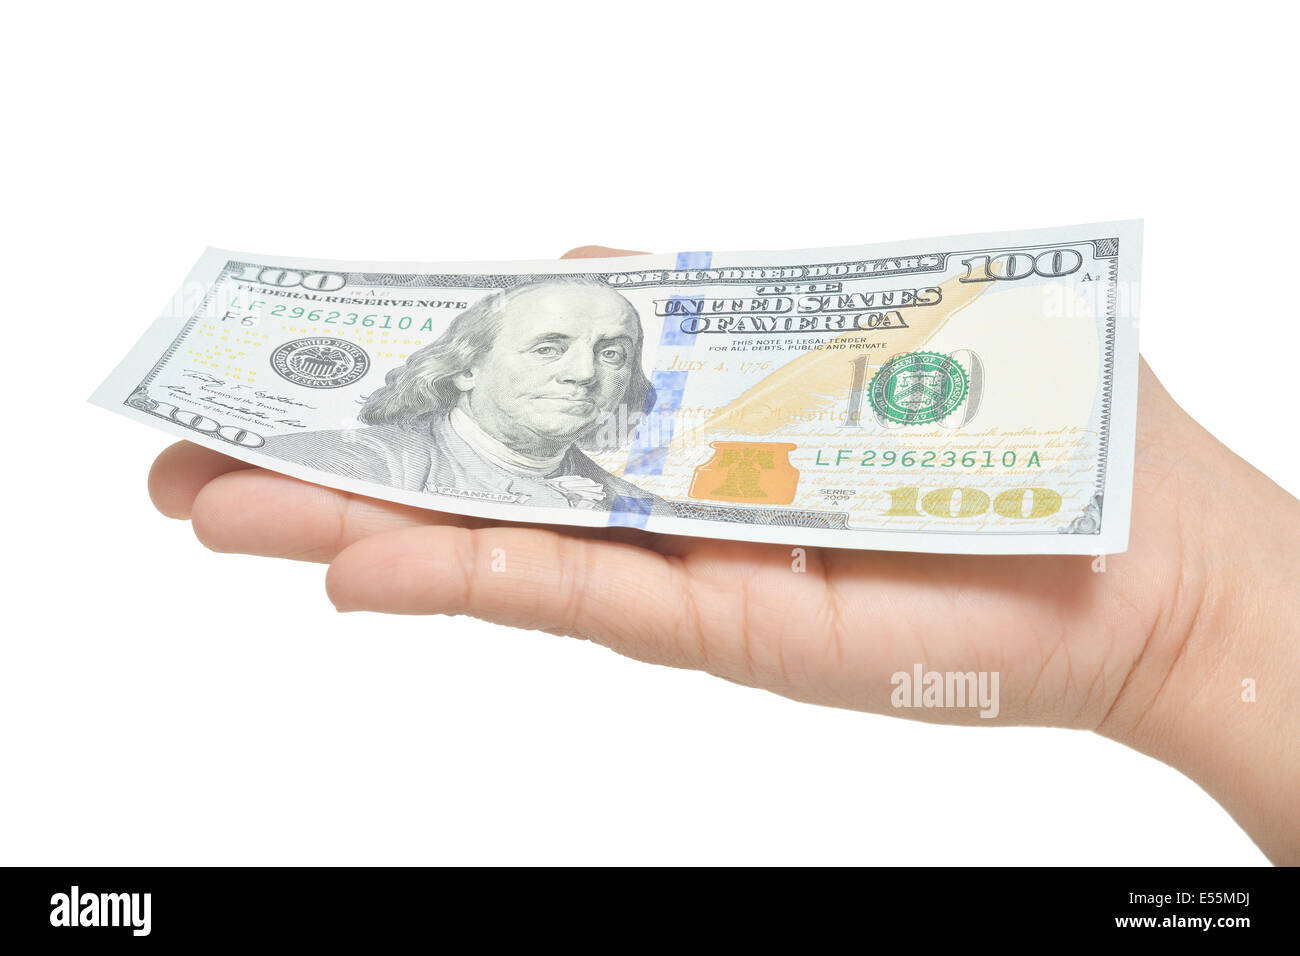 One hundred dollars in the palm of the hand, on a white background. Stock Photo